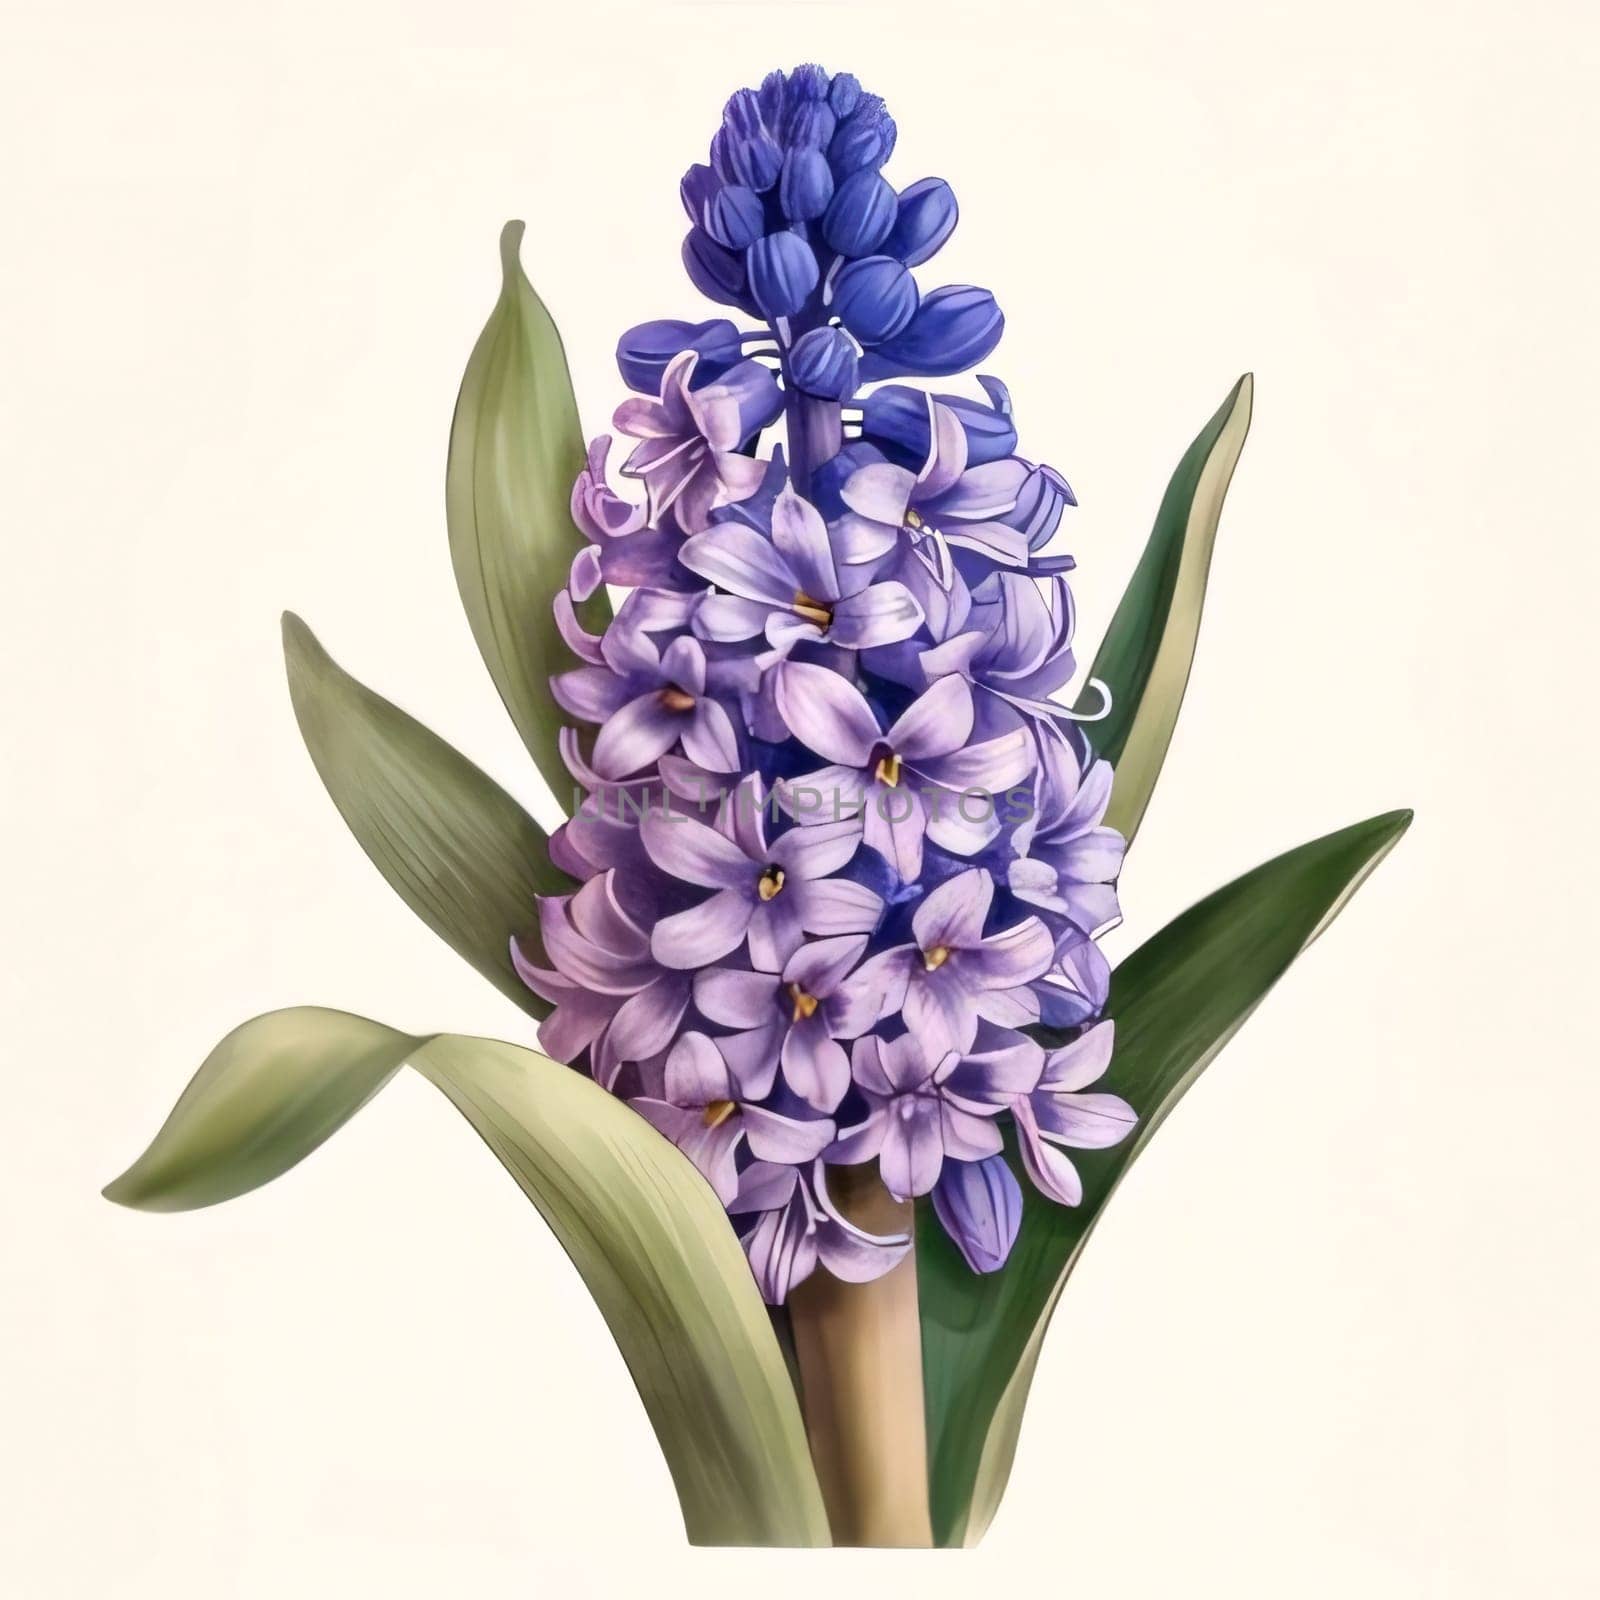 Drawn, painted flowers: purple hyacinth flower with green stem and leaves. Flowering flowers, a symbol of spring, new life. A joyful time of nature waking up to life.